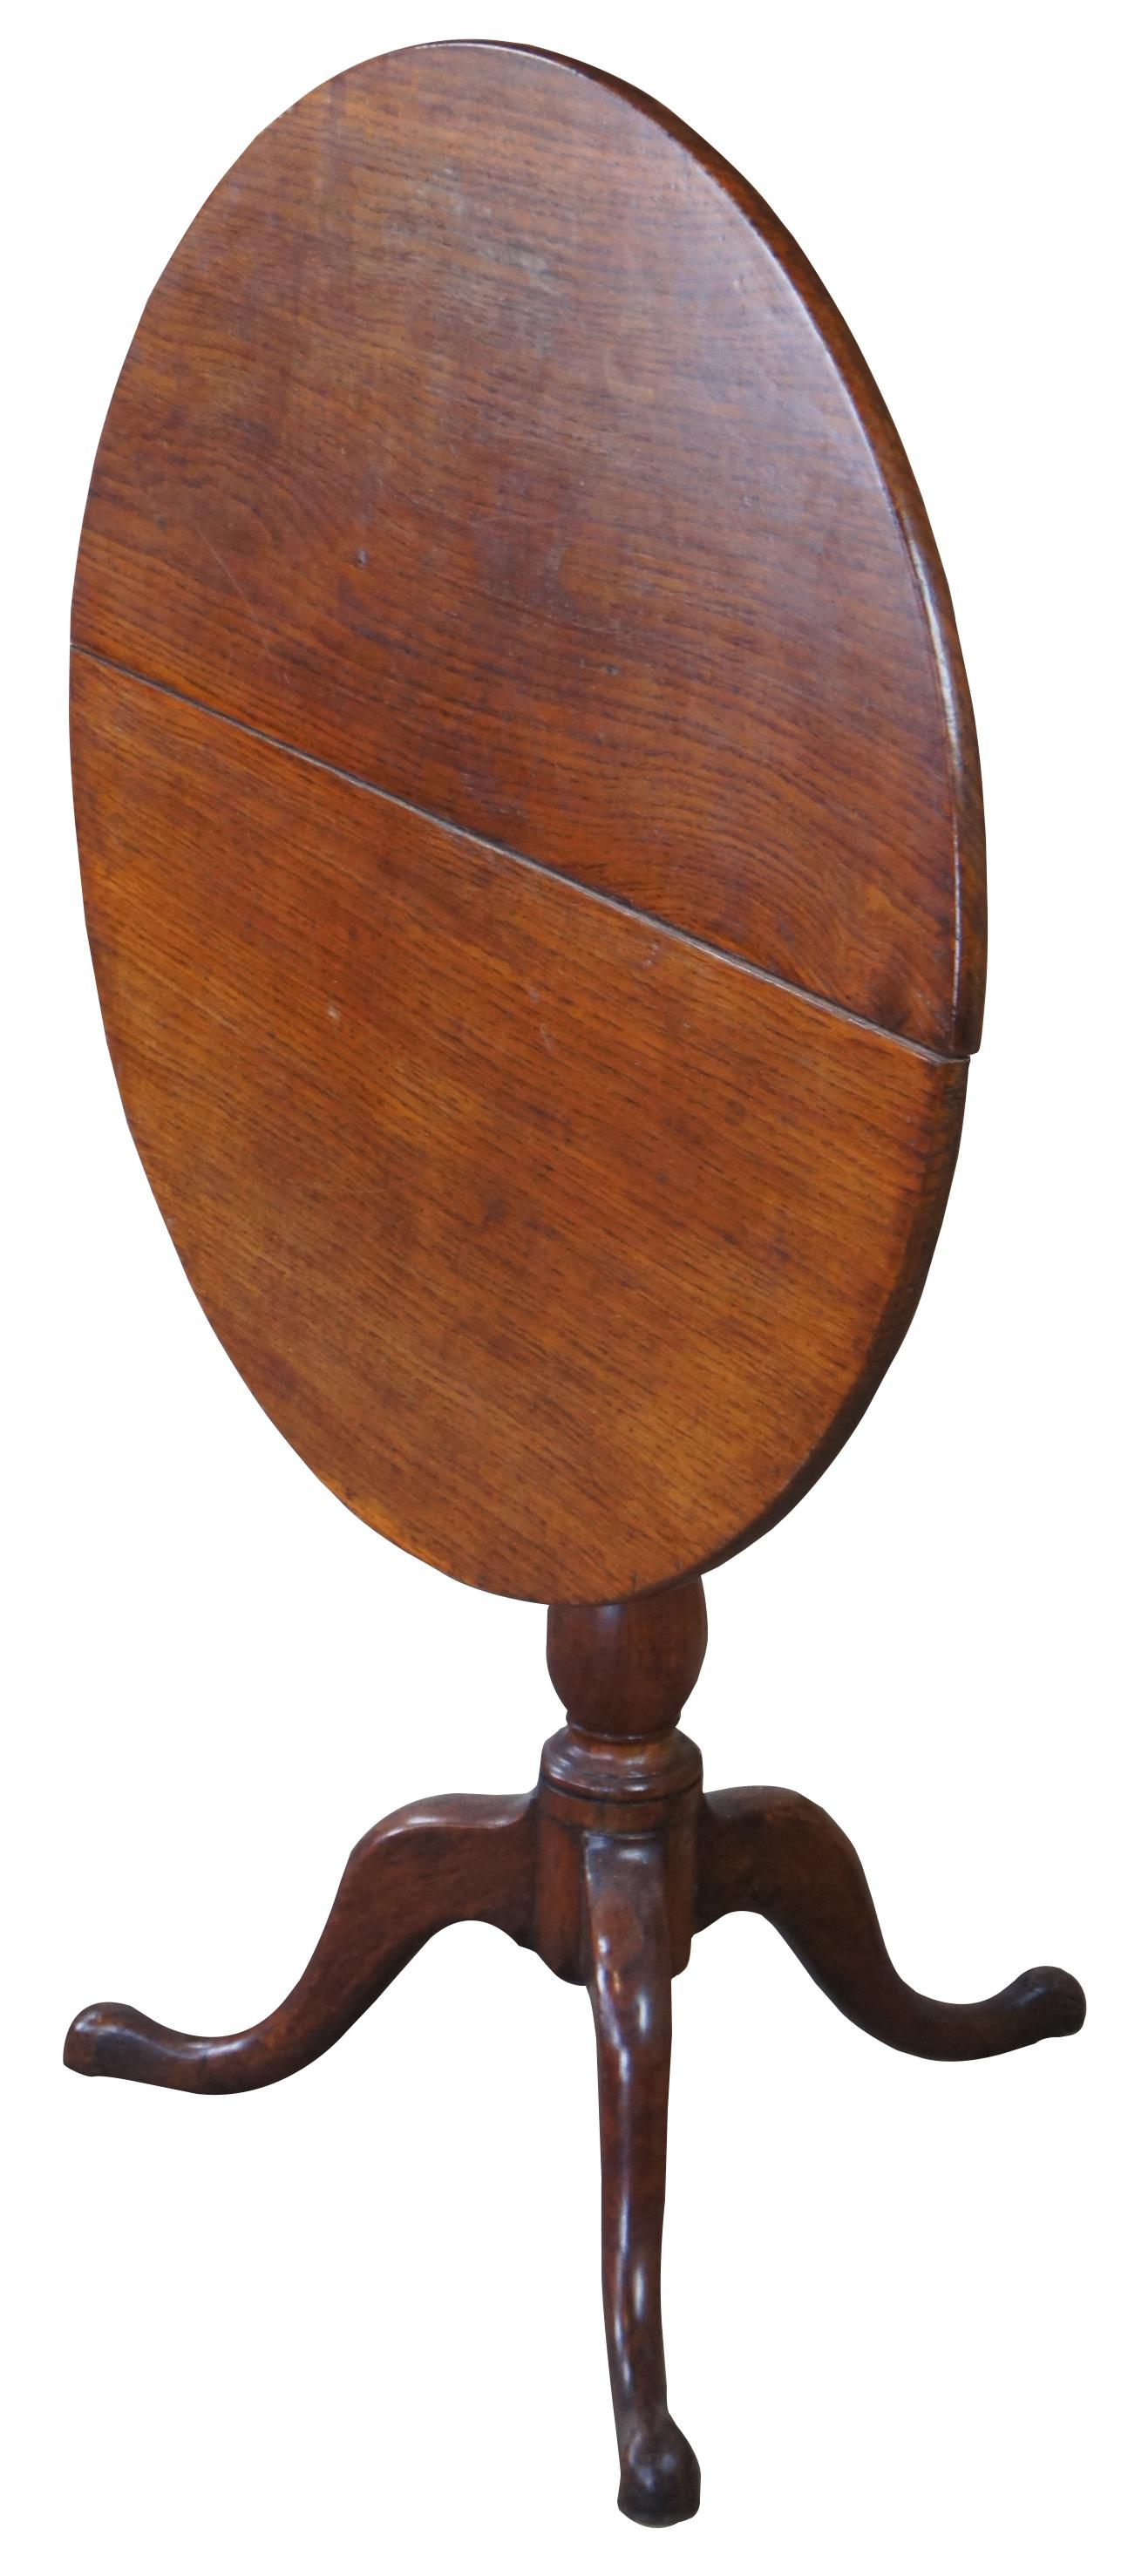 Late 19th century Queen Anne style tilt top table. Made from pine with a round top supported by a turned baluster over cabriole legs leading to pad feet. Latch along underside.
  